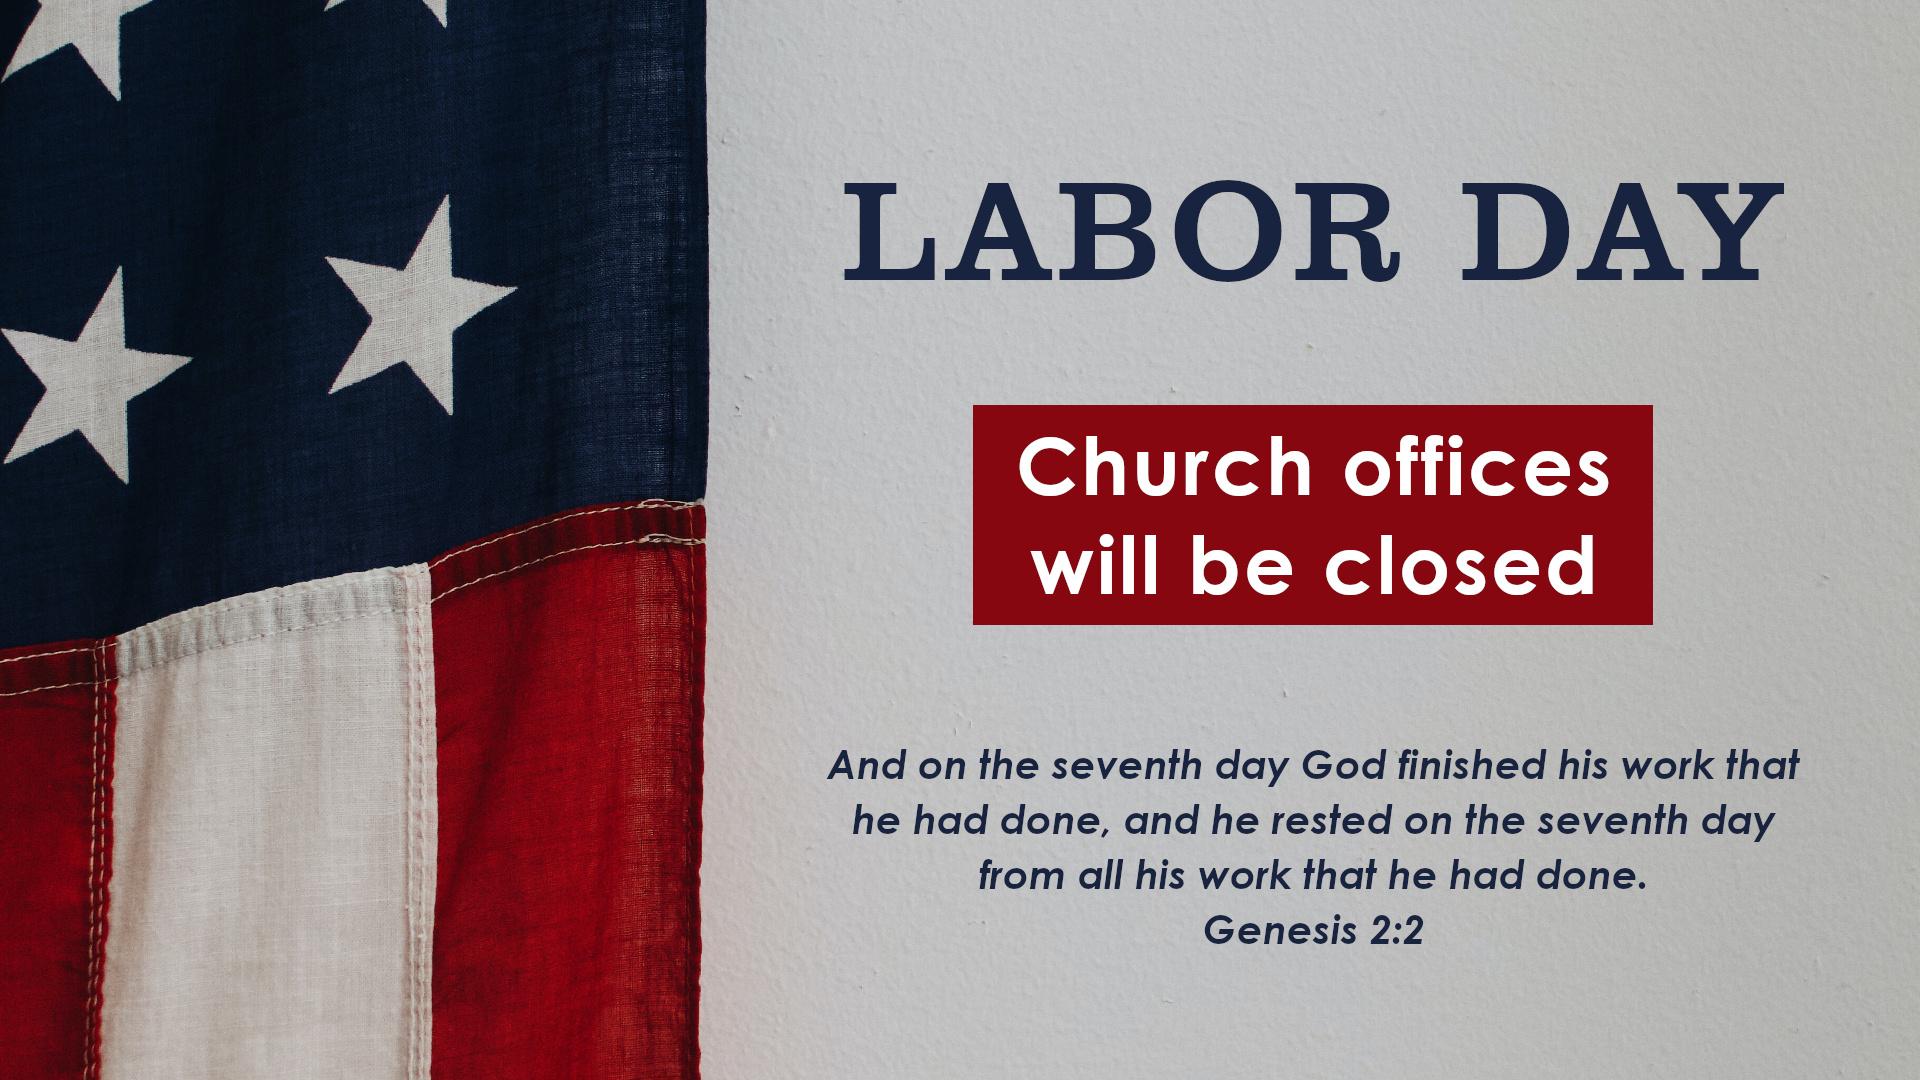 American flag with text saying church offices will be closed on Labor Day